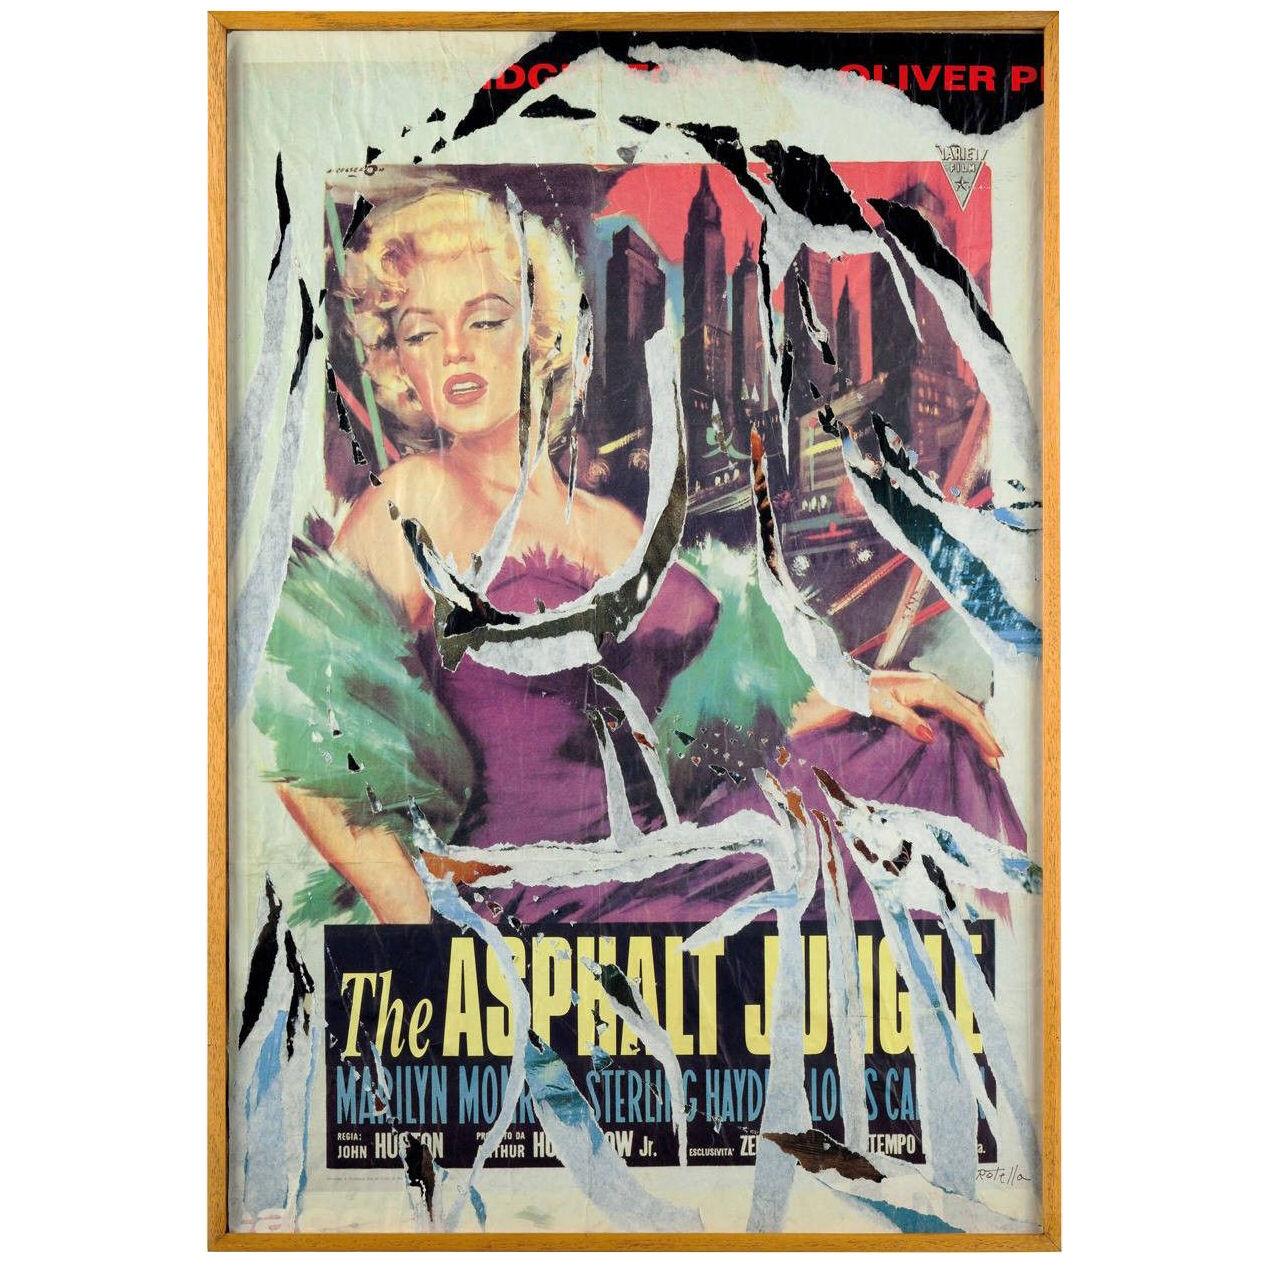 Mimmo Rotella, "Marylin sola", Lacerated poster, 1999, Italy. 